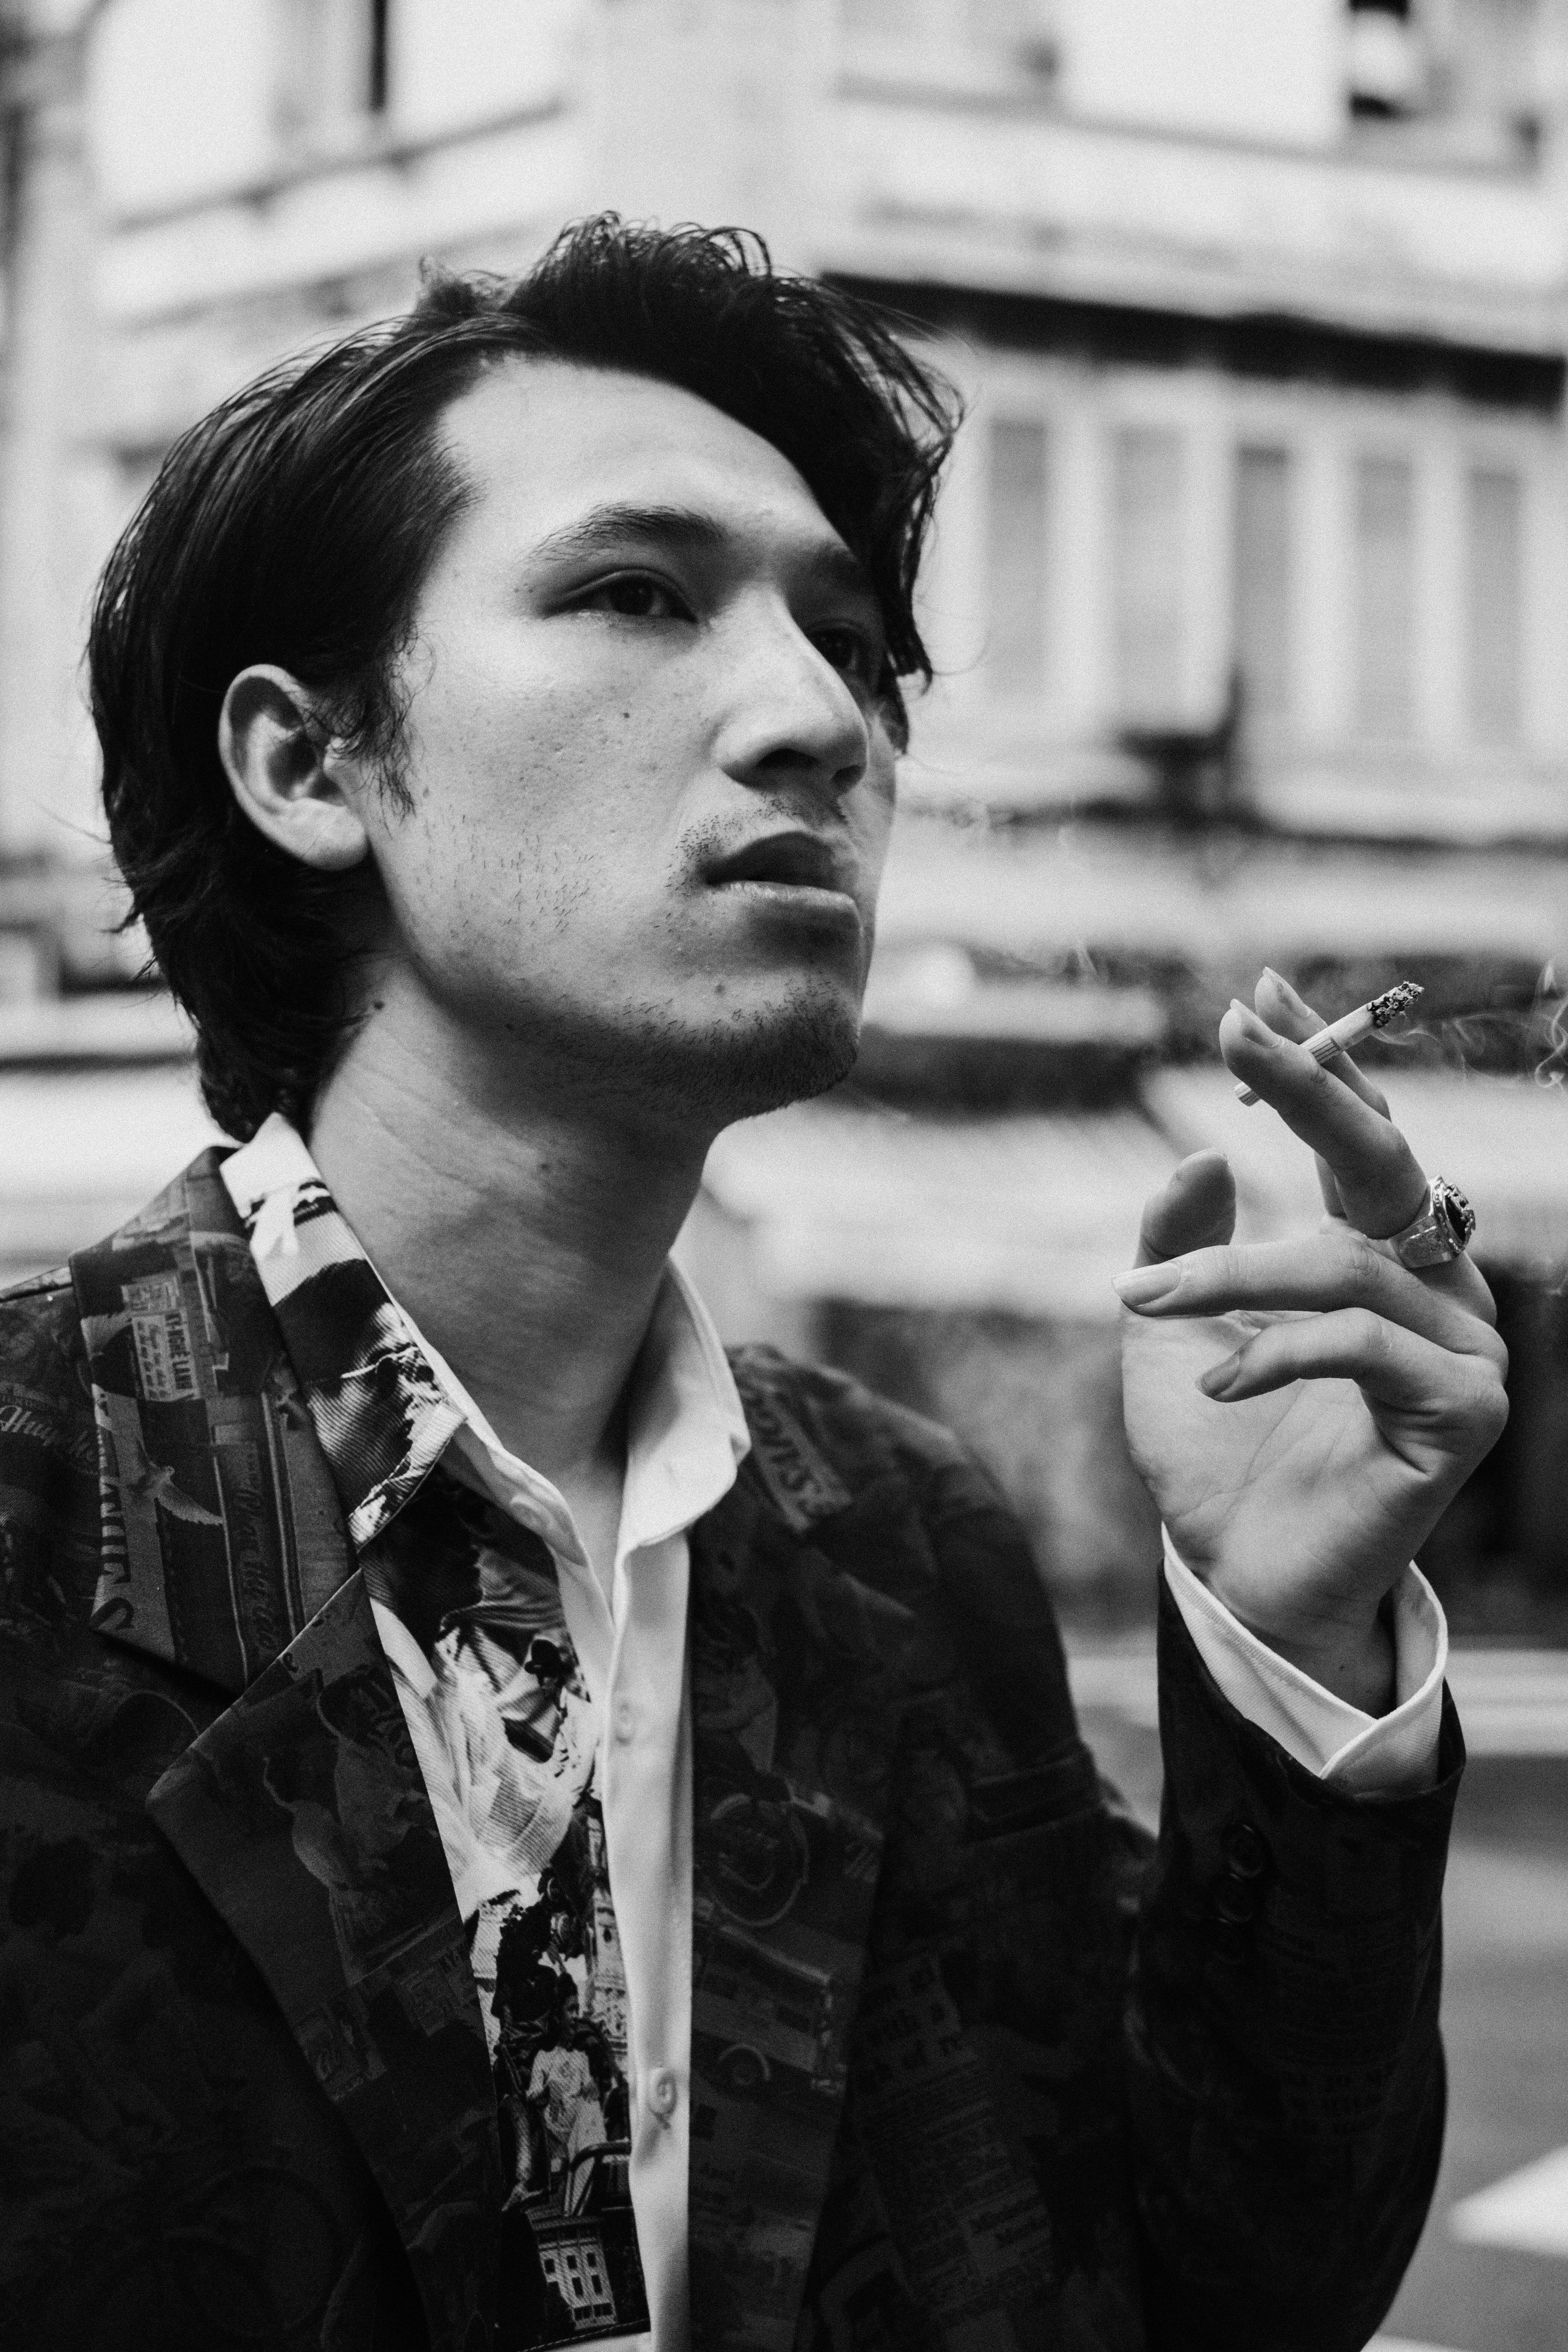 pensive young ethnic man smoking cigarette on city street